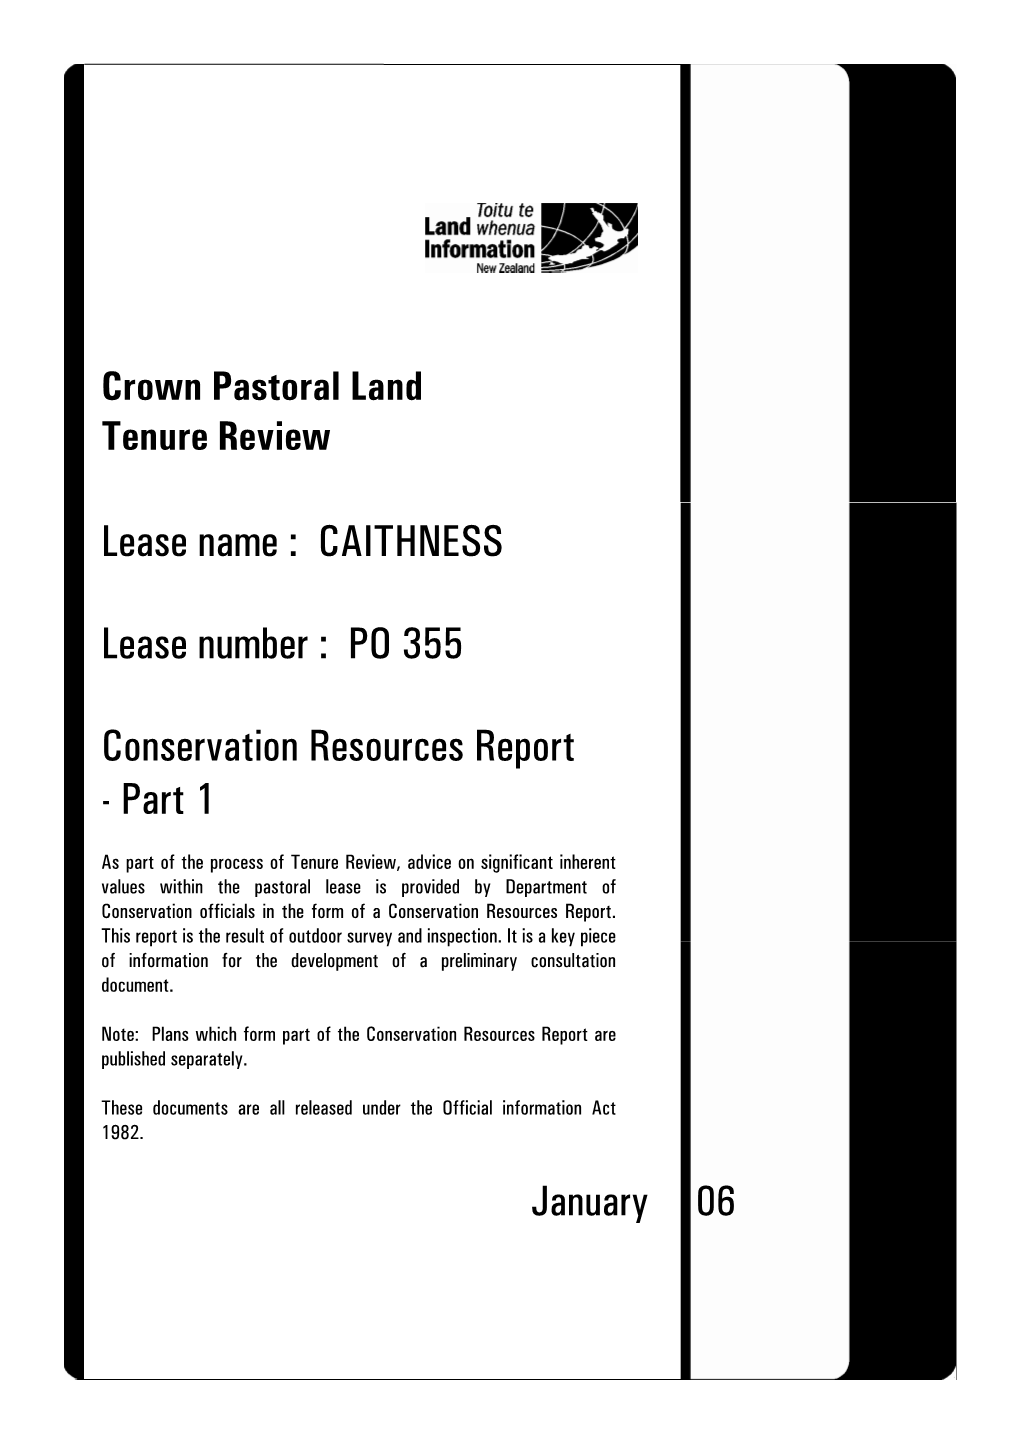 Caithness Conservation Resources Report